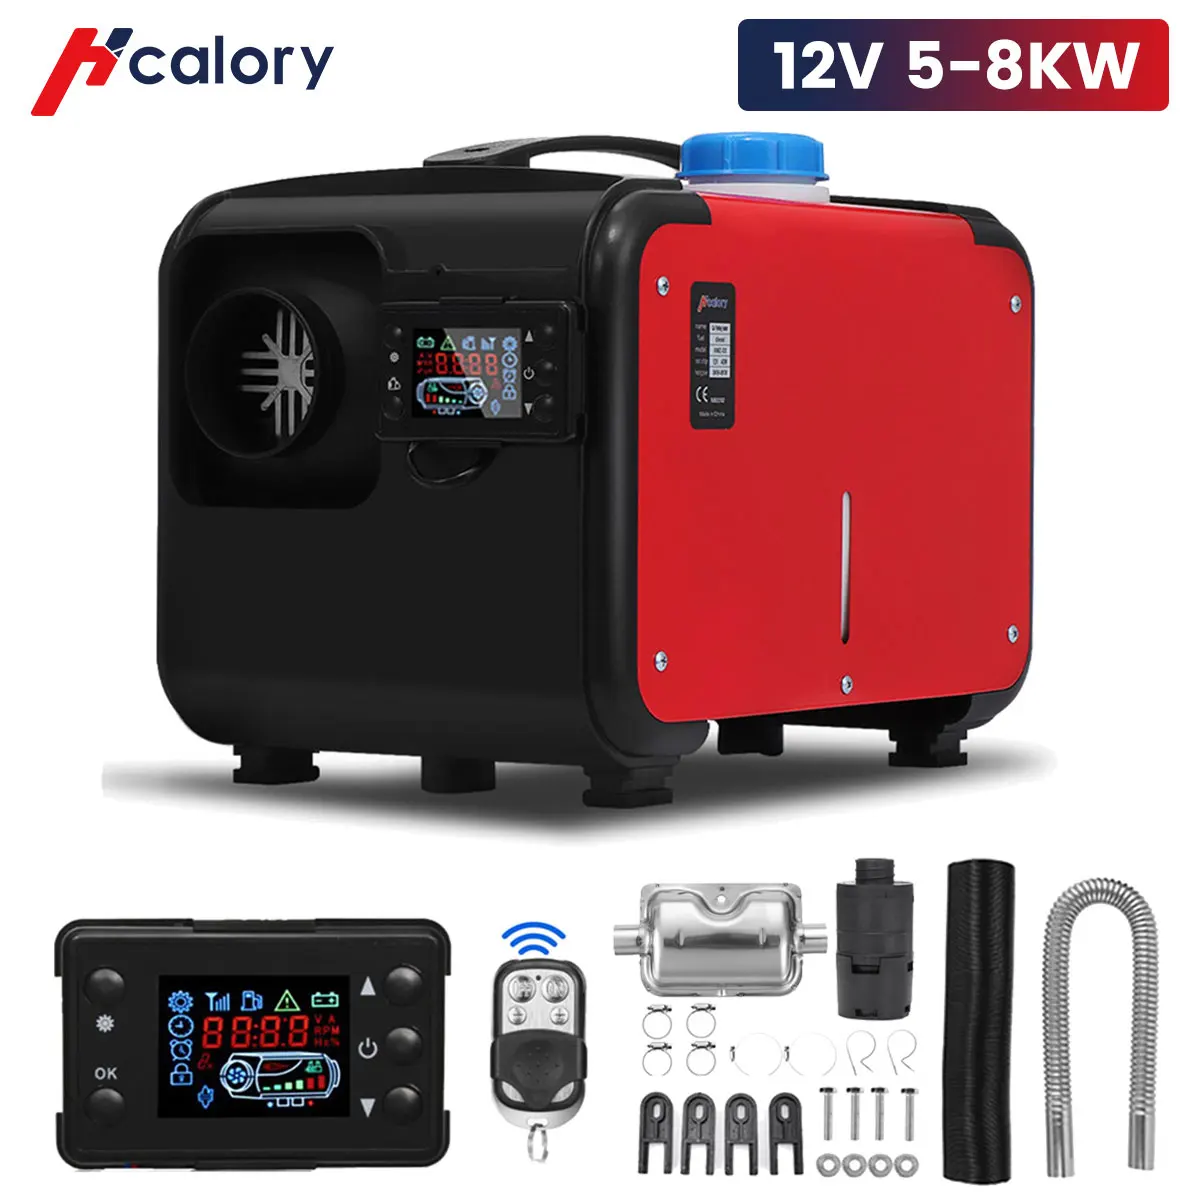 

Hcalory All in One Unit 5-8KW 12V Car Heating Tool Diesel Air Heater Parking Warmer for RV Motorhome Trailer Trucks Boats